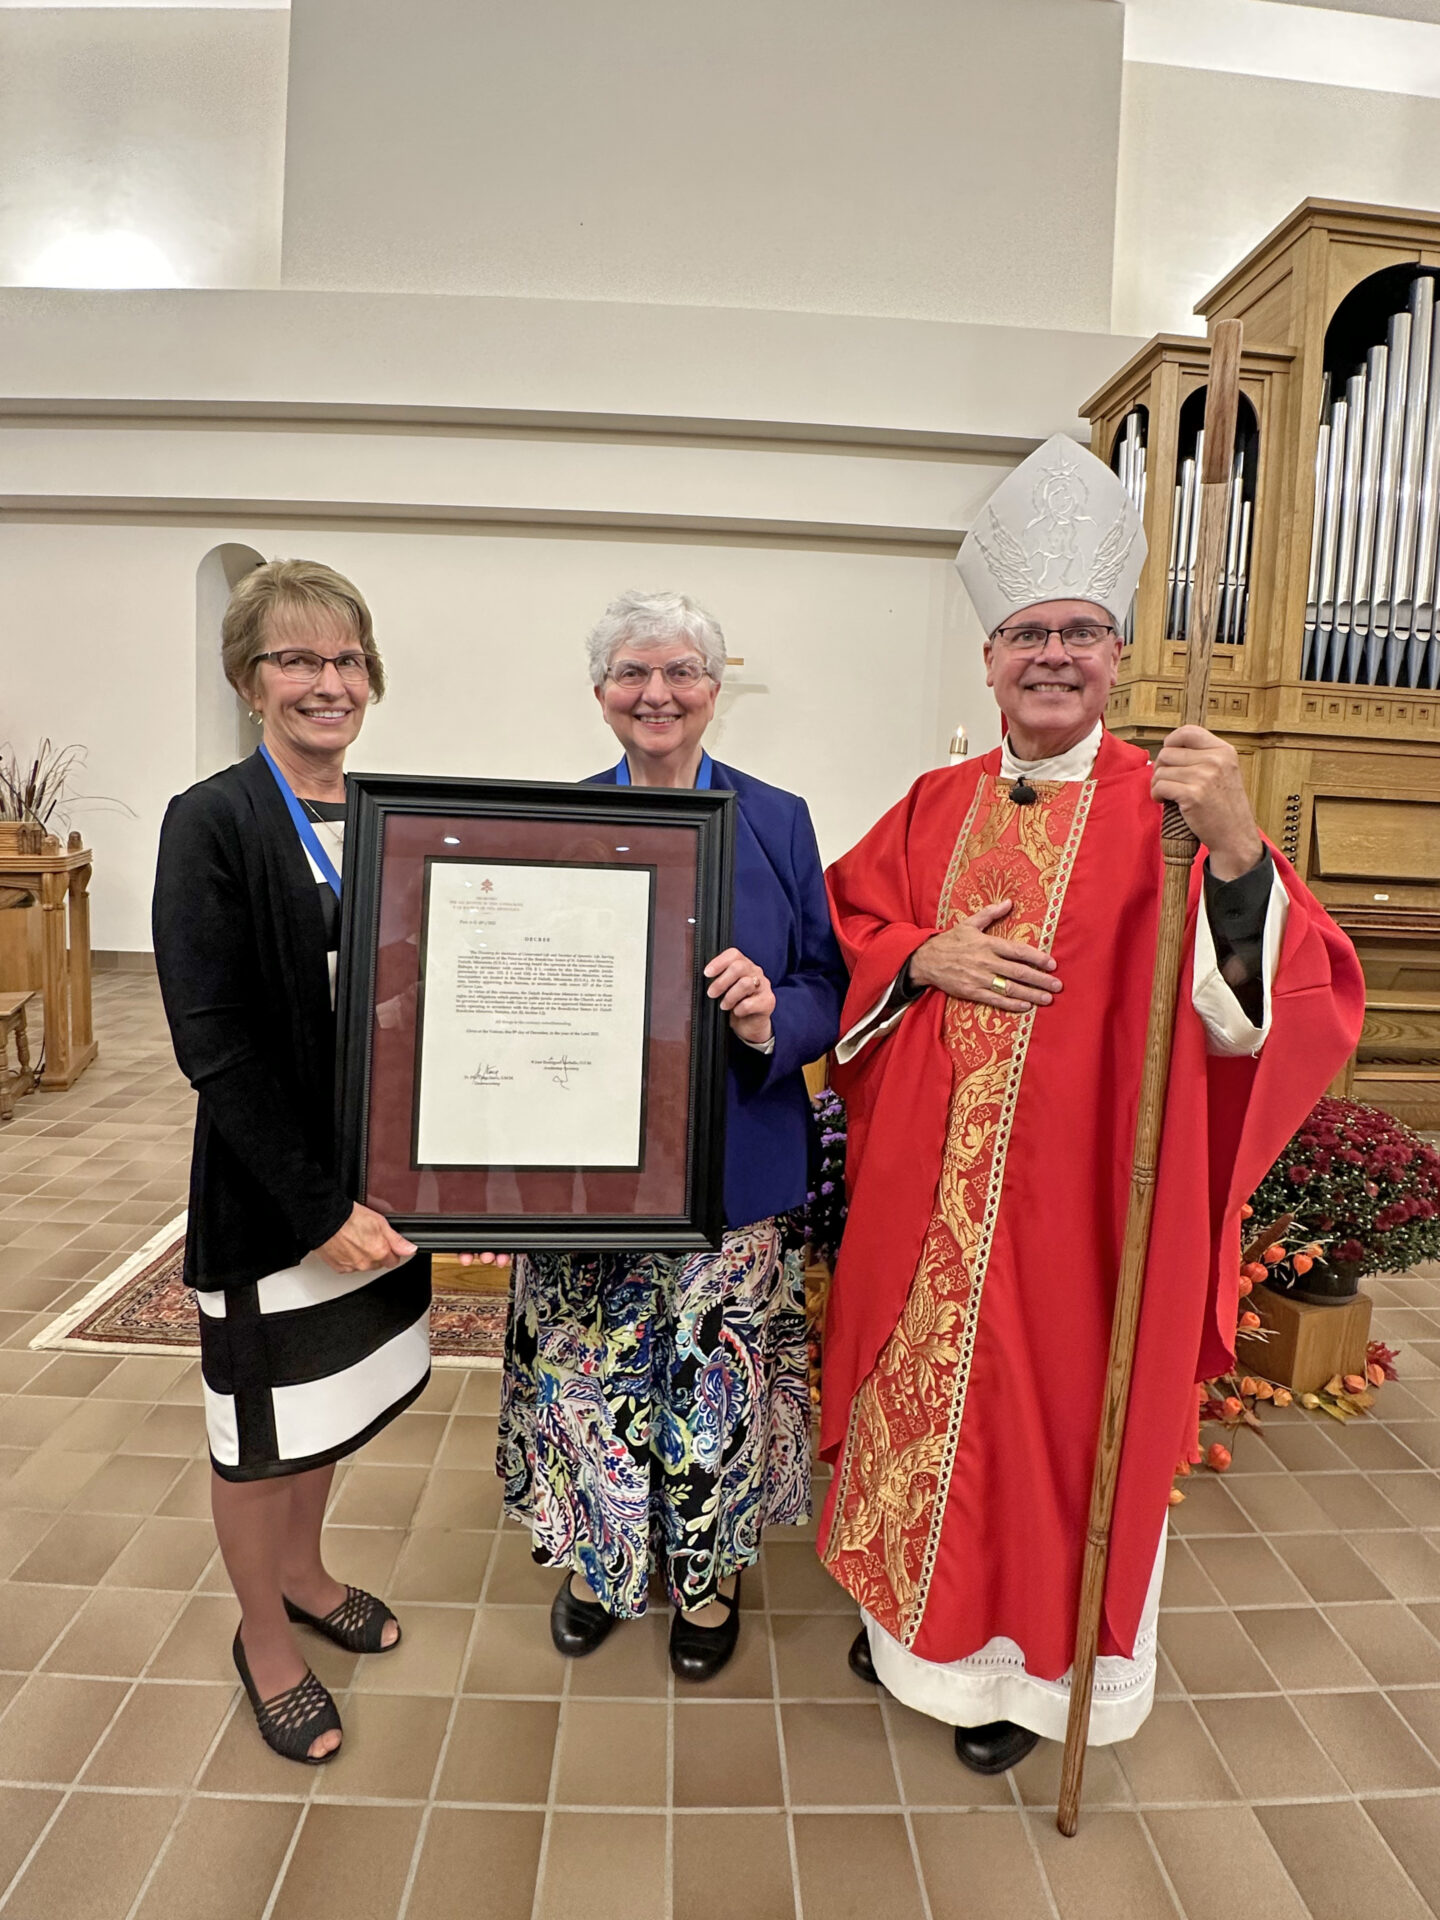 Lori Collard, Sister Beverly Raway, and Bishop Daniel Felton with letter of approval from the Vatican